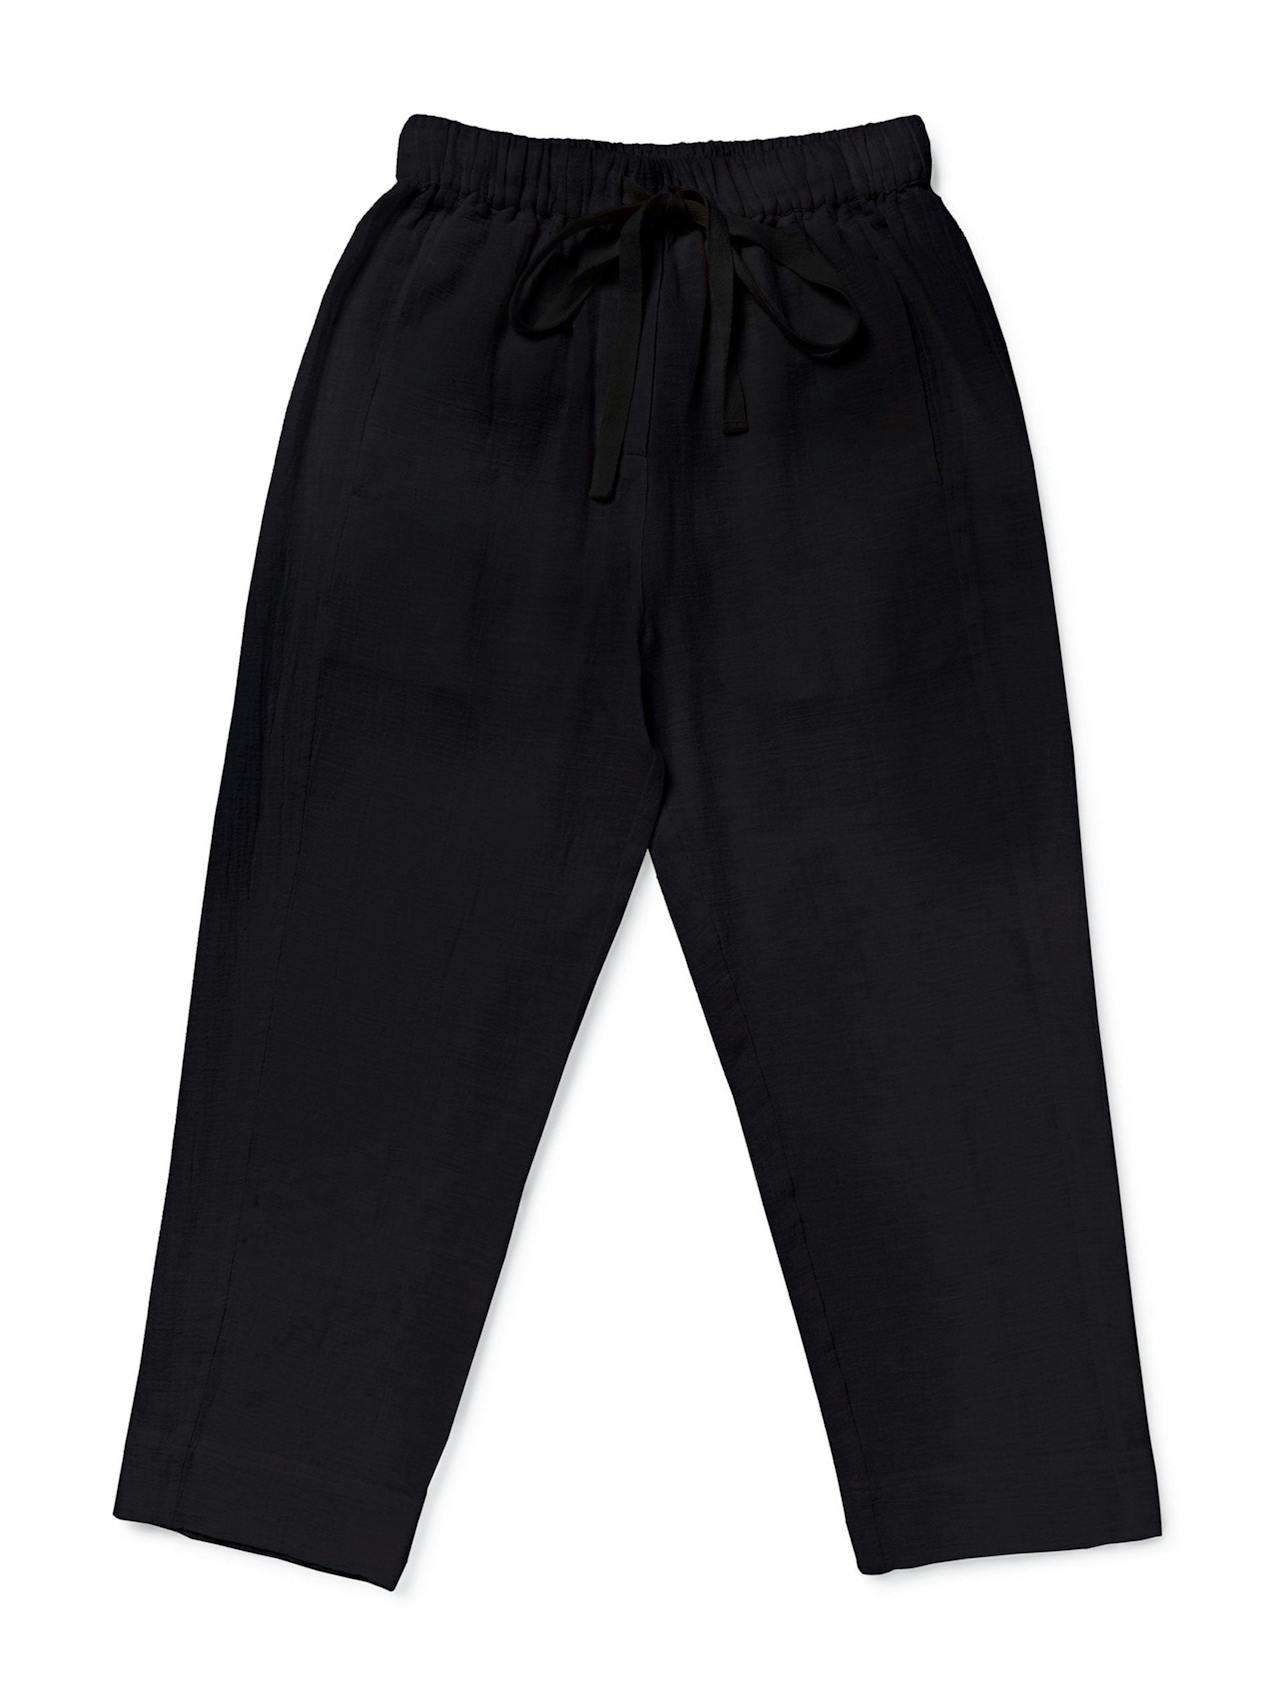 Black cheesecloth trousers